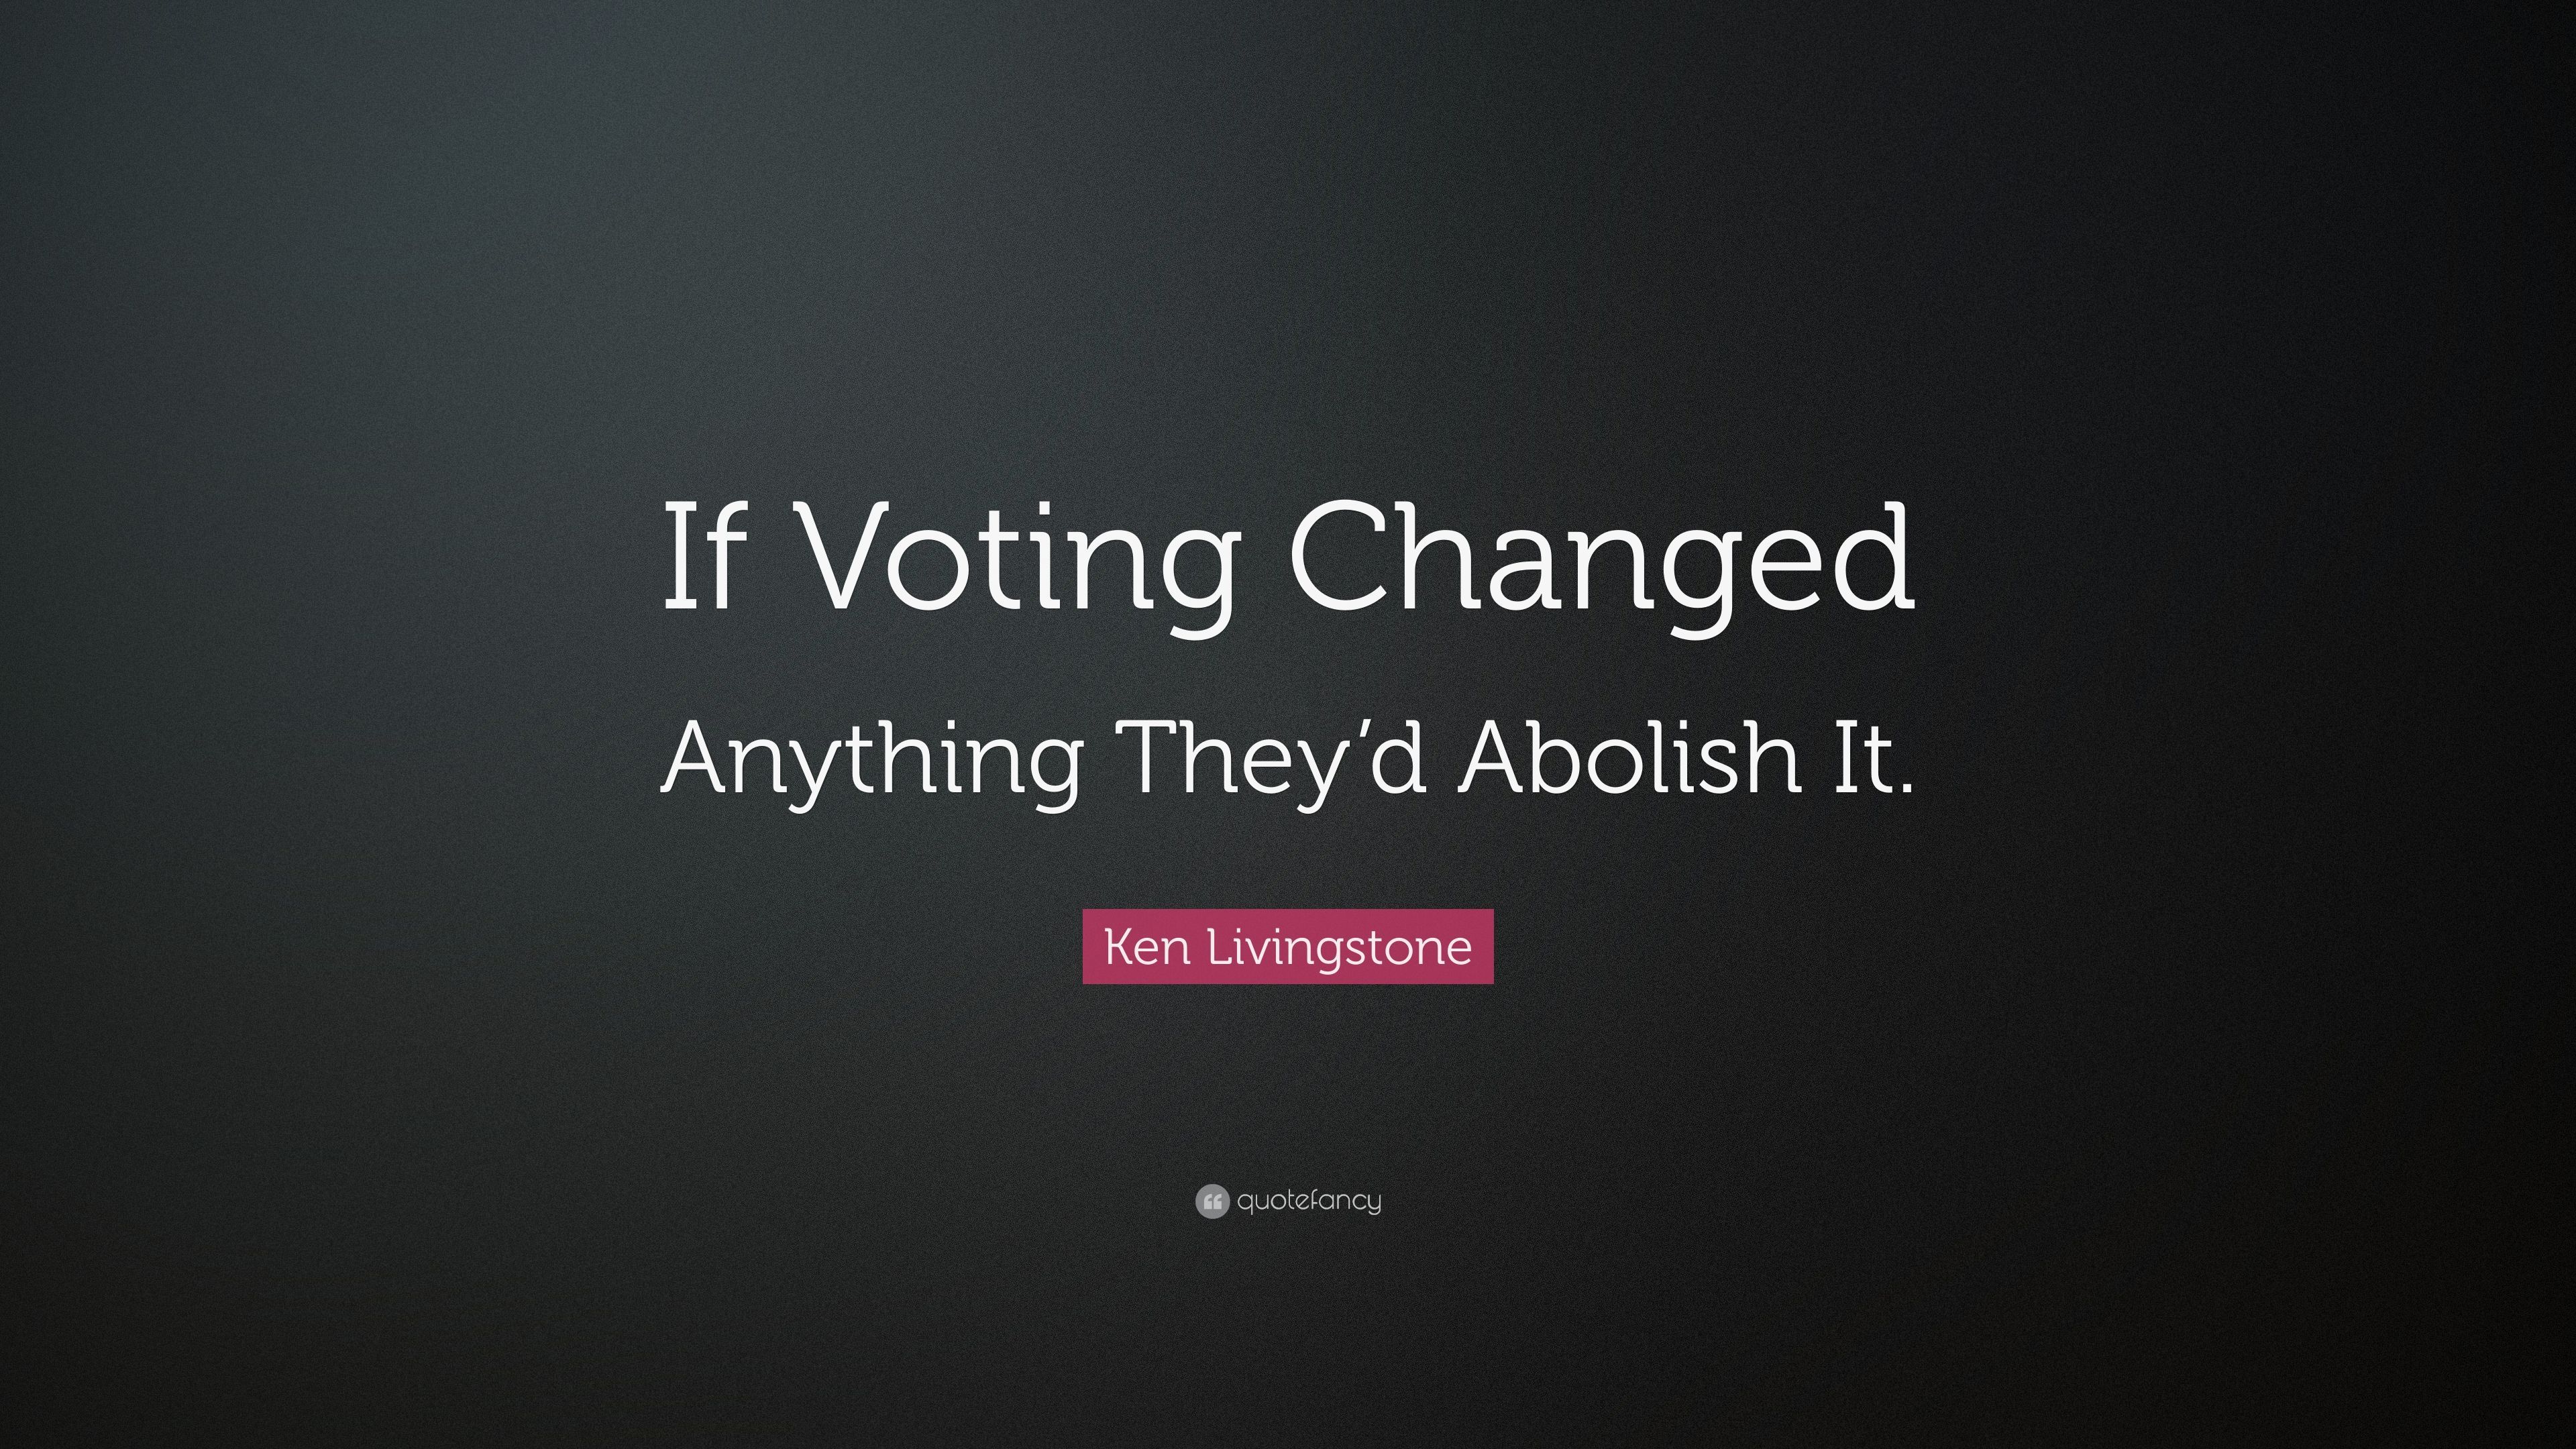 Ken Livingstone Quote: “If Voting Changed Anything They'd Abolish It.” (7 wallpaper)